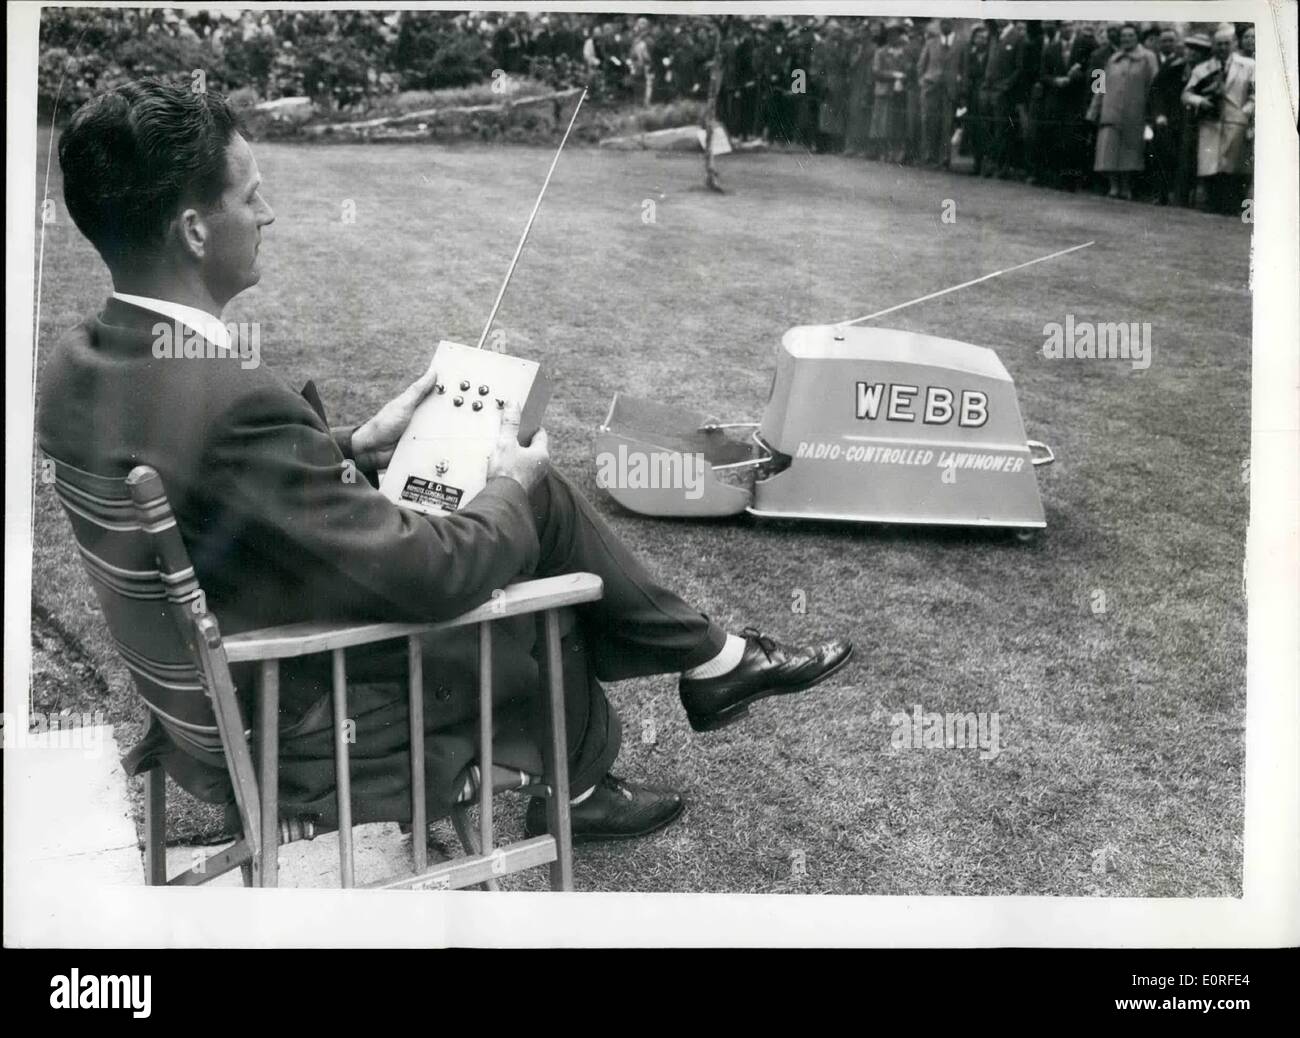 May 05, 1959 - Radio-Controlled Lawn Mower On Show At The Chelsea Flower Show: The first radio-controlled lawn mower will be shown to the public for the first time at tomorrow's opening of the Chelsea Flower Show.The mower travels at nearly 2 m.p.h., has a 14-inch cutting width and makes 60 clips to the yard. It has independent ''four-point'' suspension to ride undulations in the lawn. Its 1/3 h.p. 24-volt battery operated motor is remotely controlled by two switches on the user's radio transmitter. The effective range of radio control is up to a mile Stock Photo